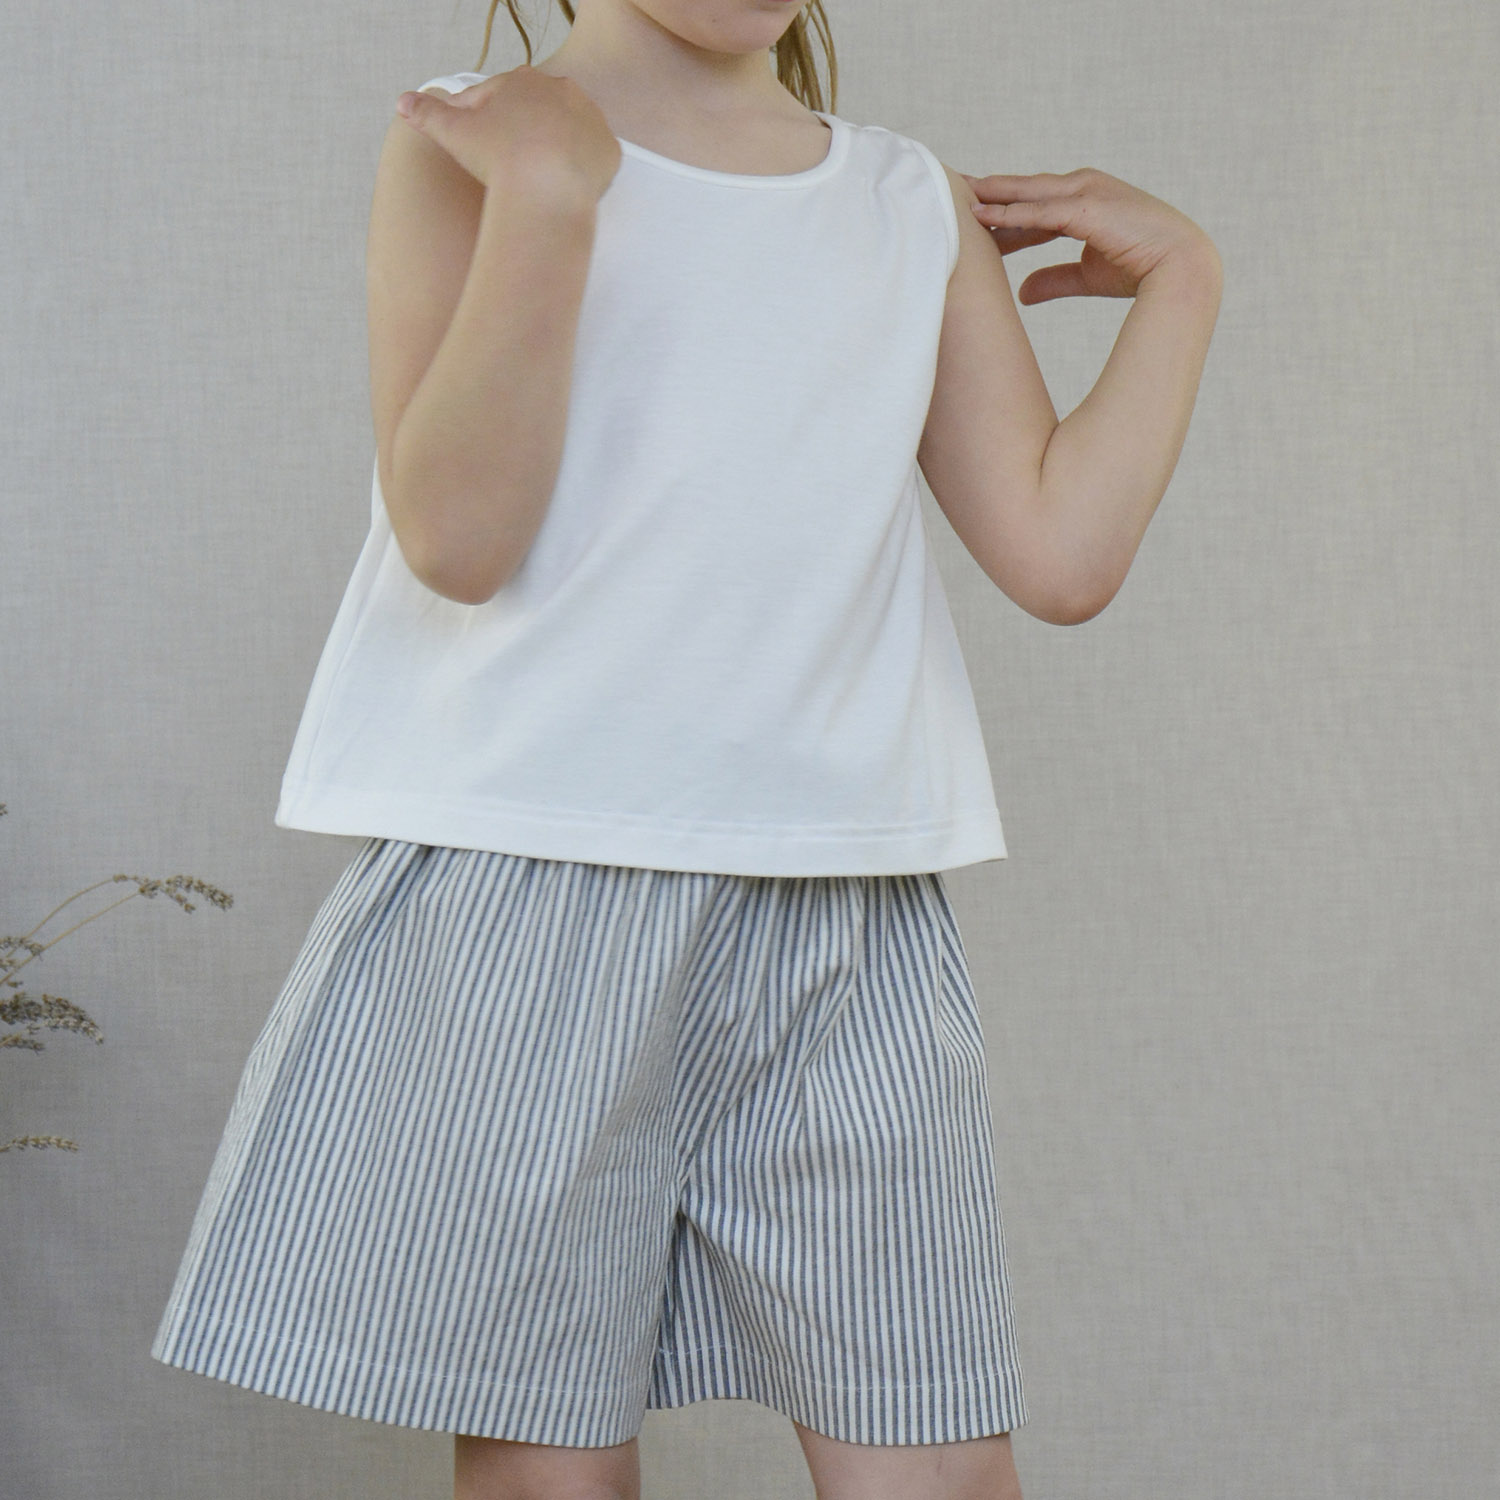 Annie Jeans striped shorts and Chiara top